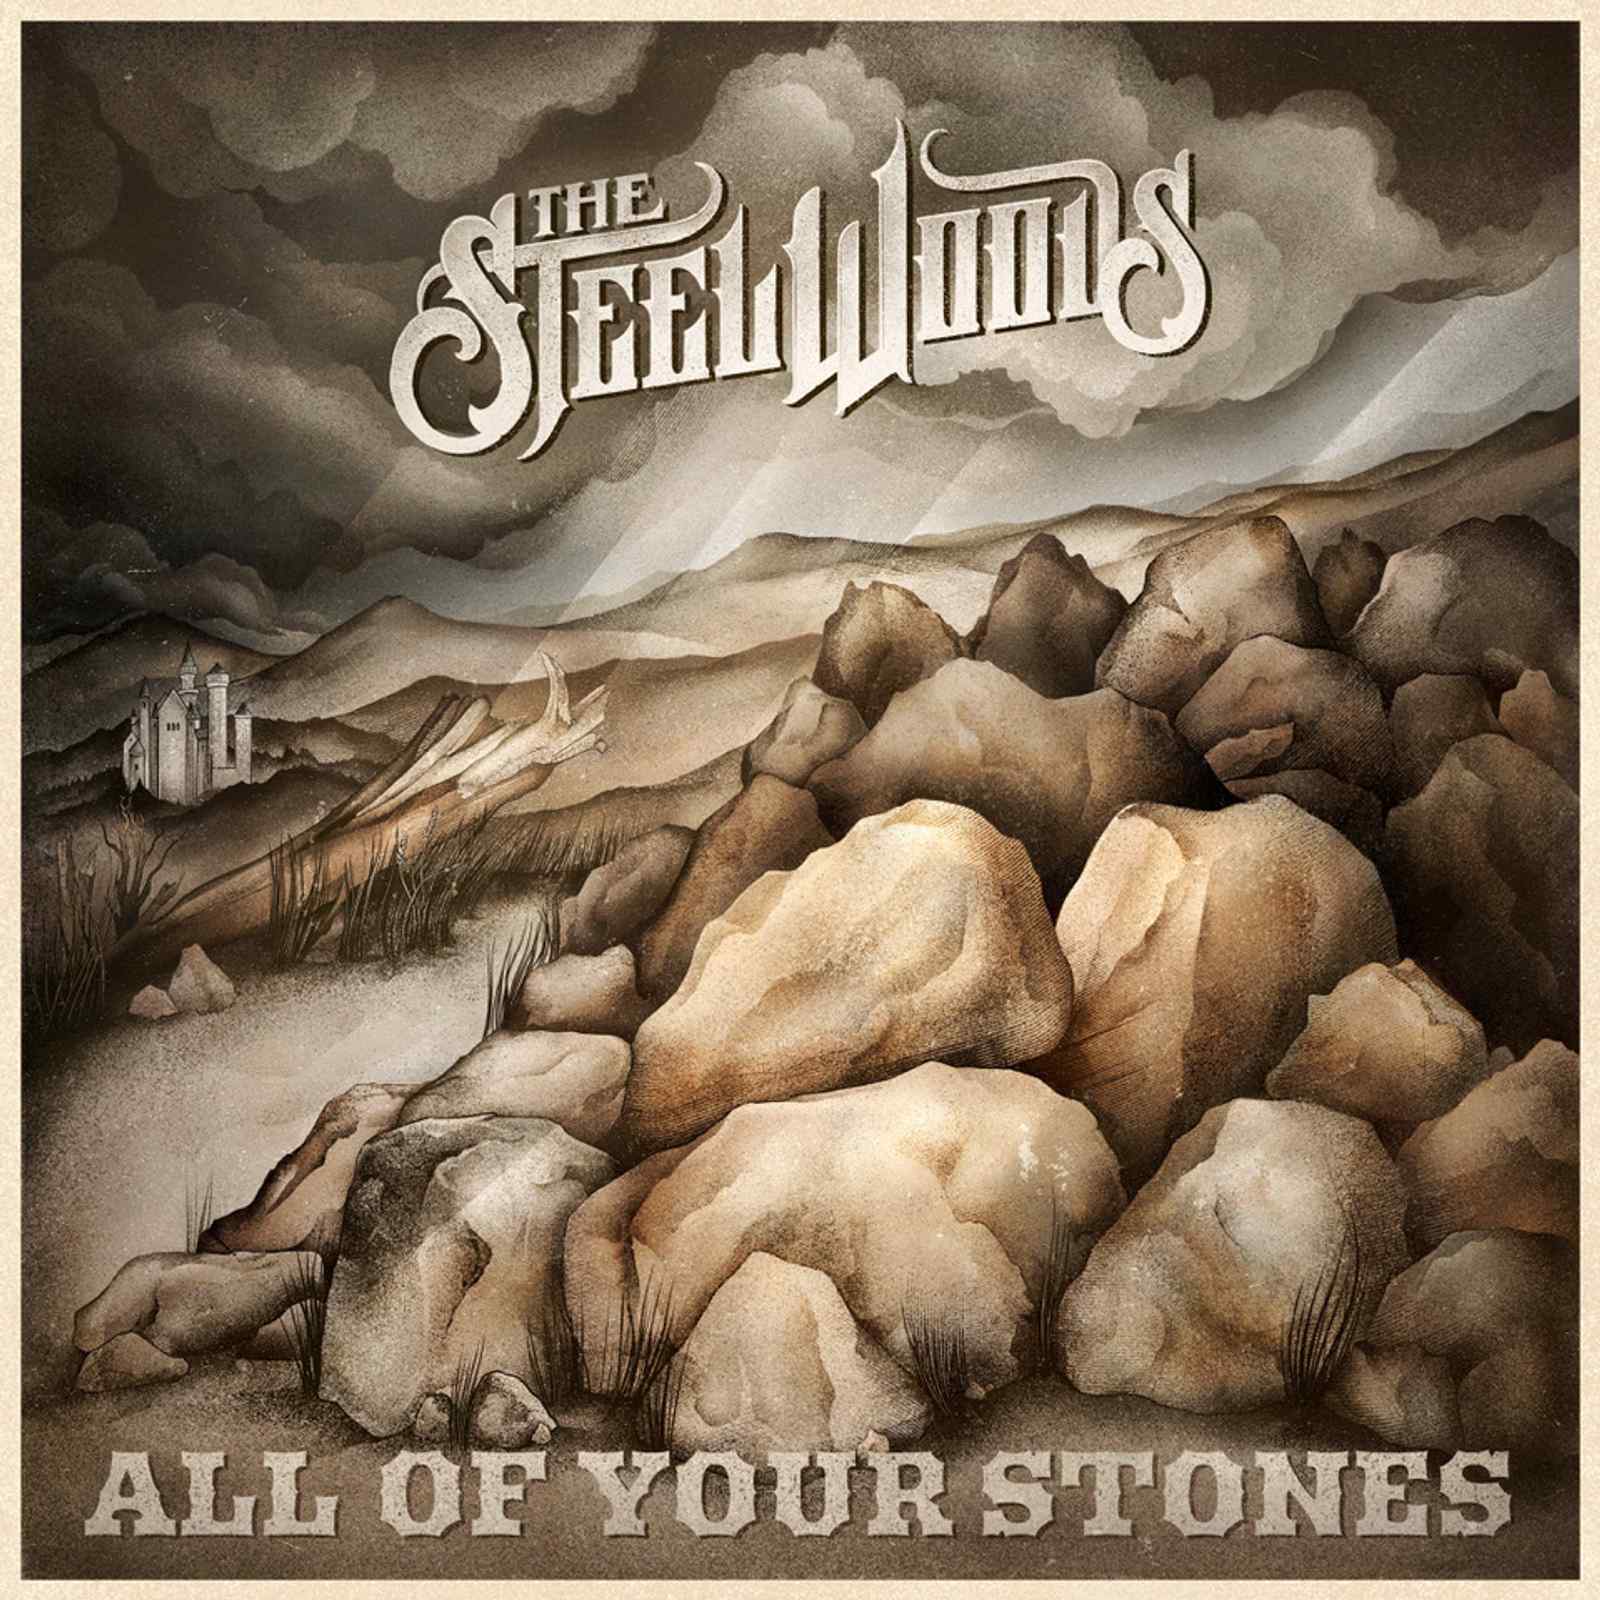 The Steel Woods Debut “All Of Your Stones” Music Video Featuring Late Guitar Player Jason “Rowdy” Cope